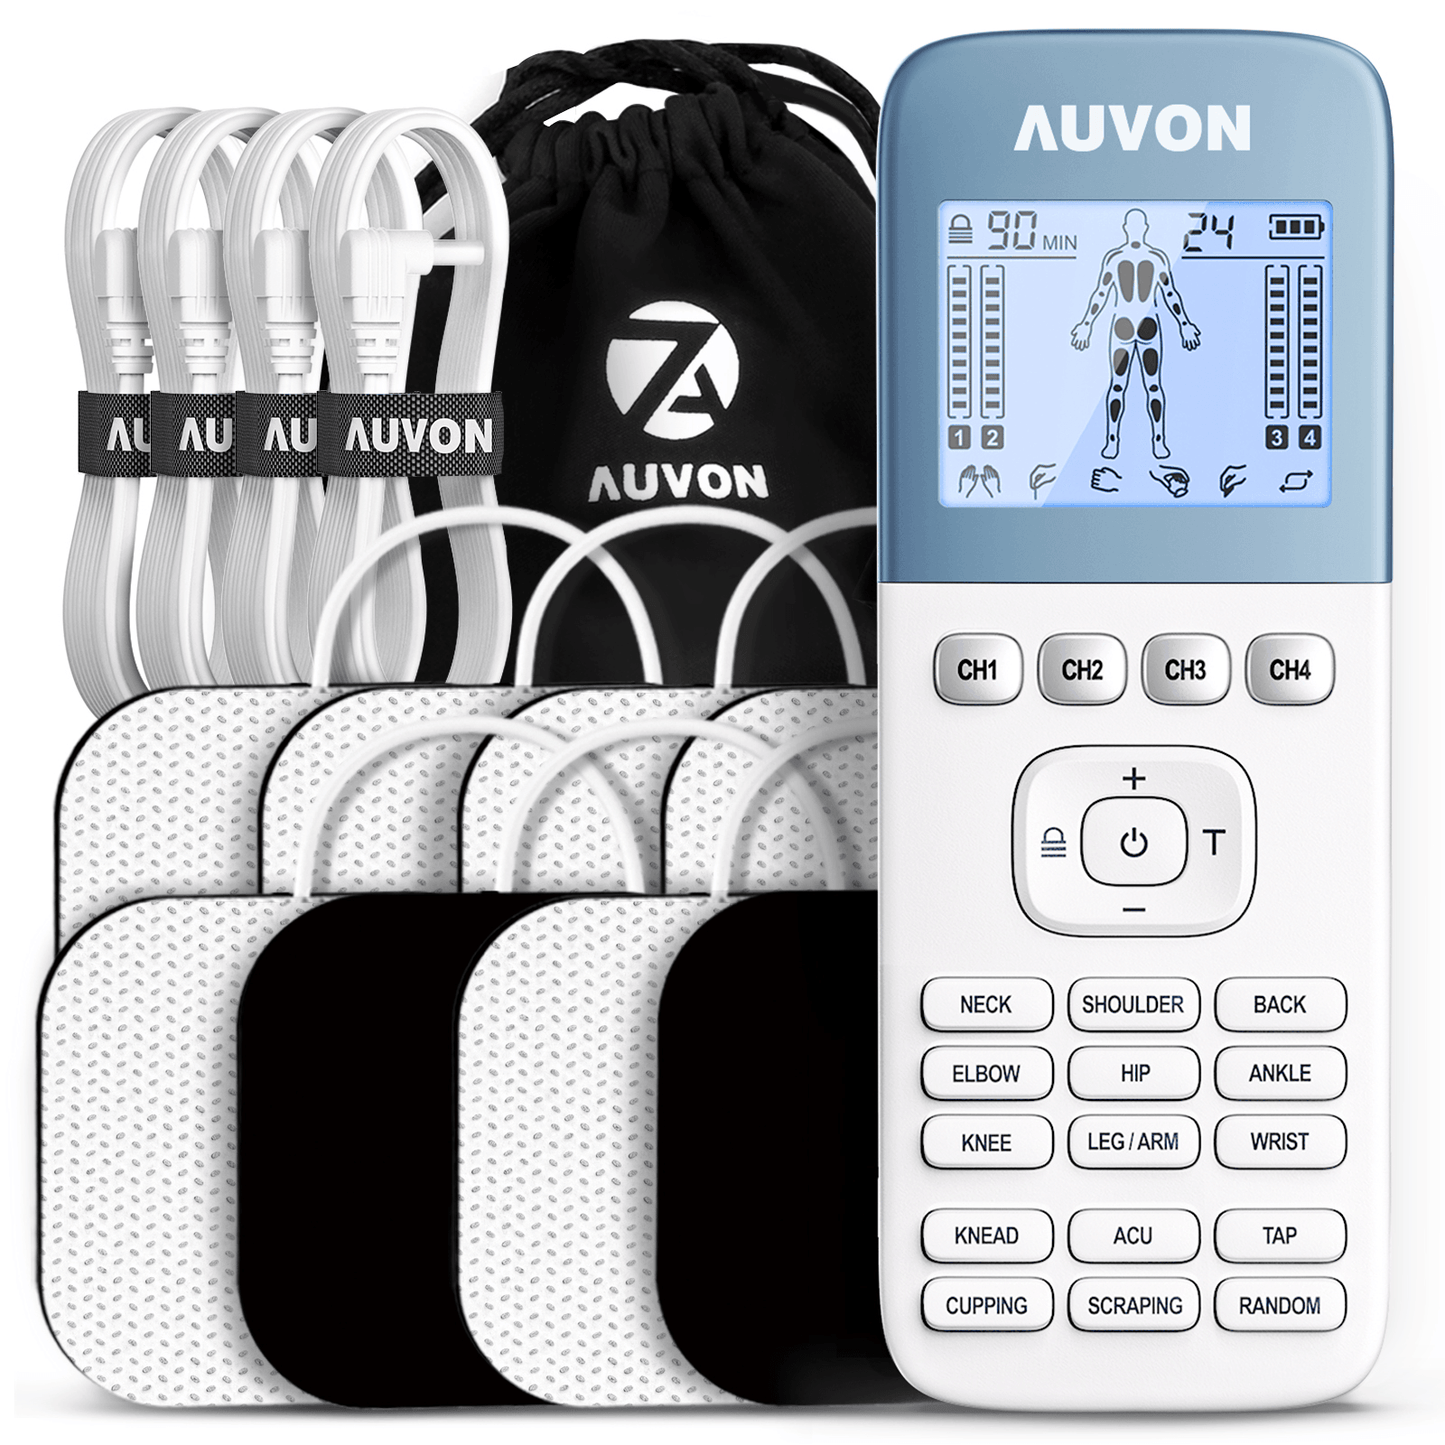 https://auvonhealth.com/cdn/shop/files/auvon-4-outputs-h1-tens-unit-24-modes-muscle-stimulator-for-pain-relief-rechargeable-tens-ems-machine-with-easy-to-select-button-design-2x-battery-life-dust-proof-bag-and-8-electrode_c879c02a-6355-4918-9250-a4b7d3cdc37a.png?v=1686019696&width=1445